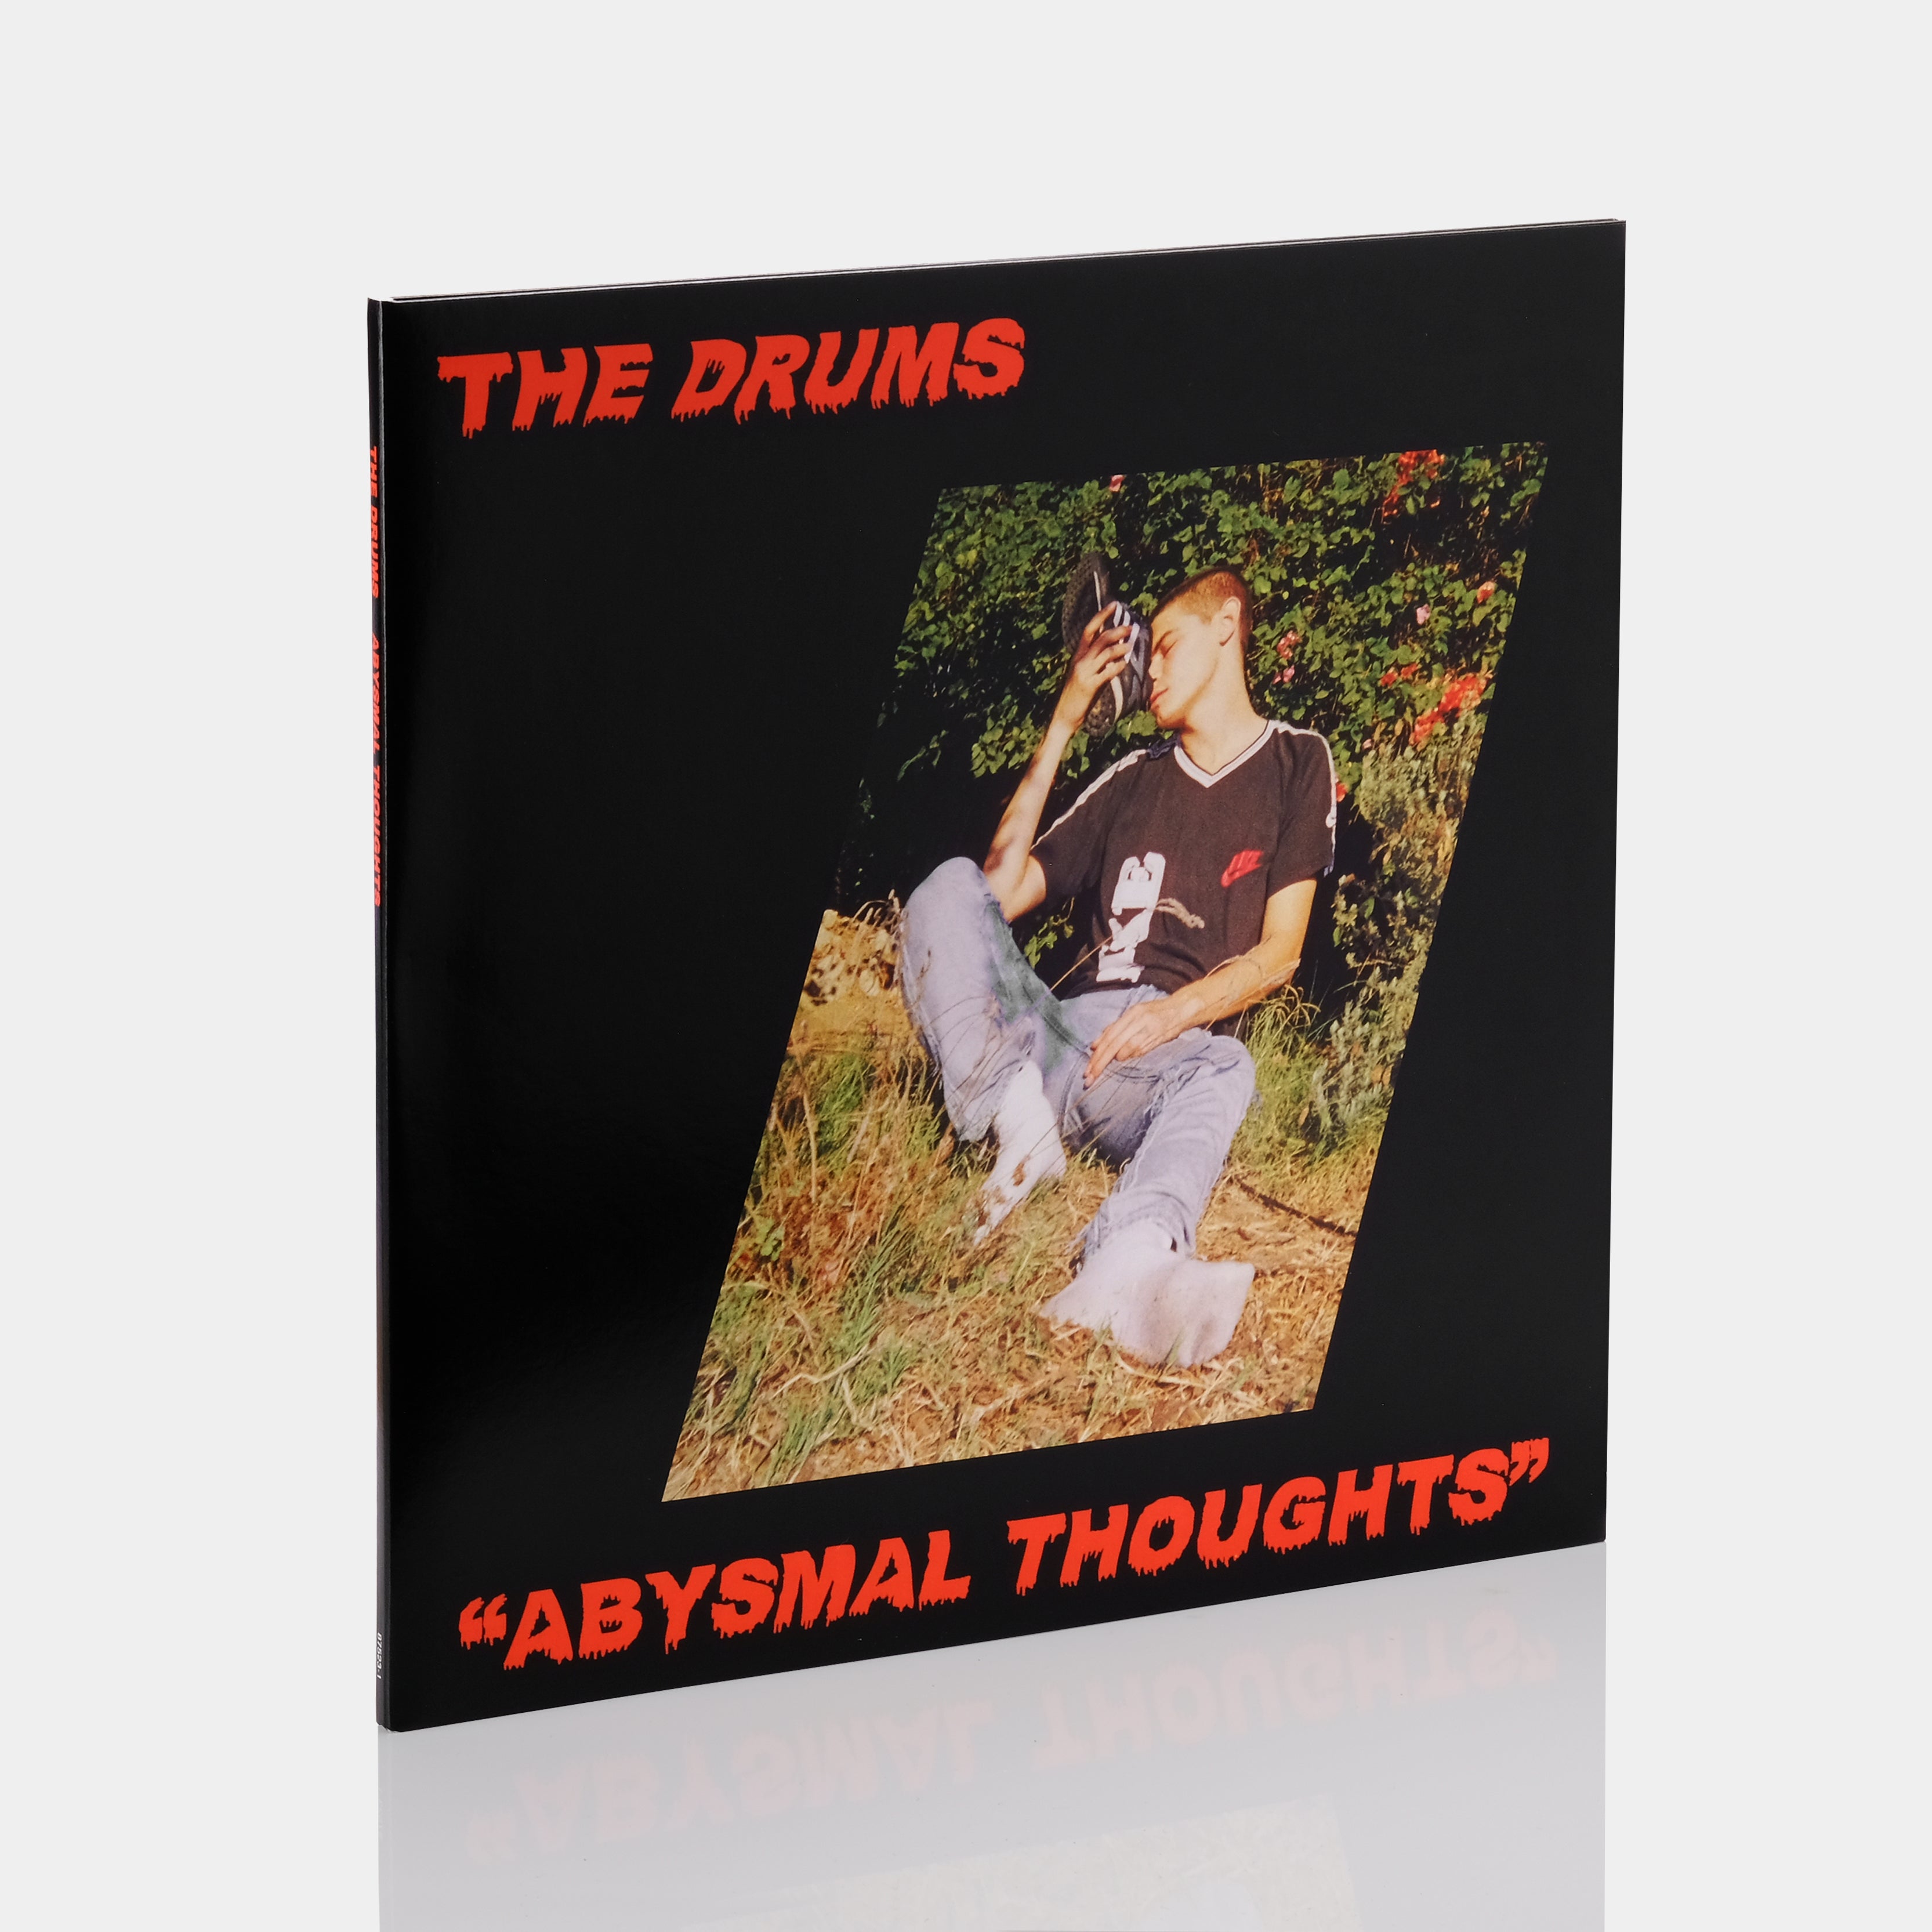 The Drums - Abysmal Thoughts 2xLP Opaque Orange Vinyl Record